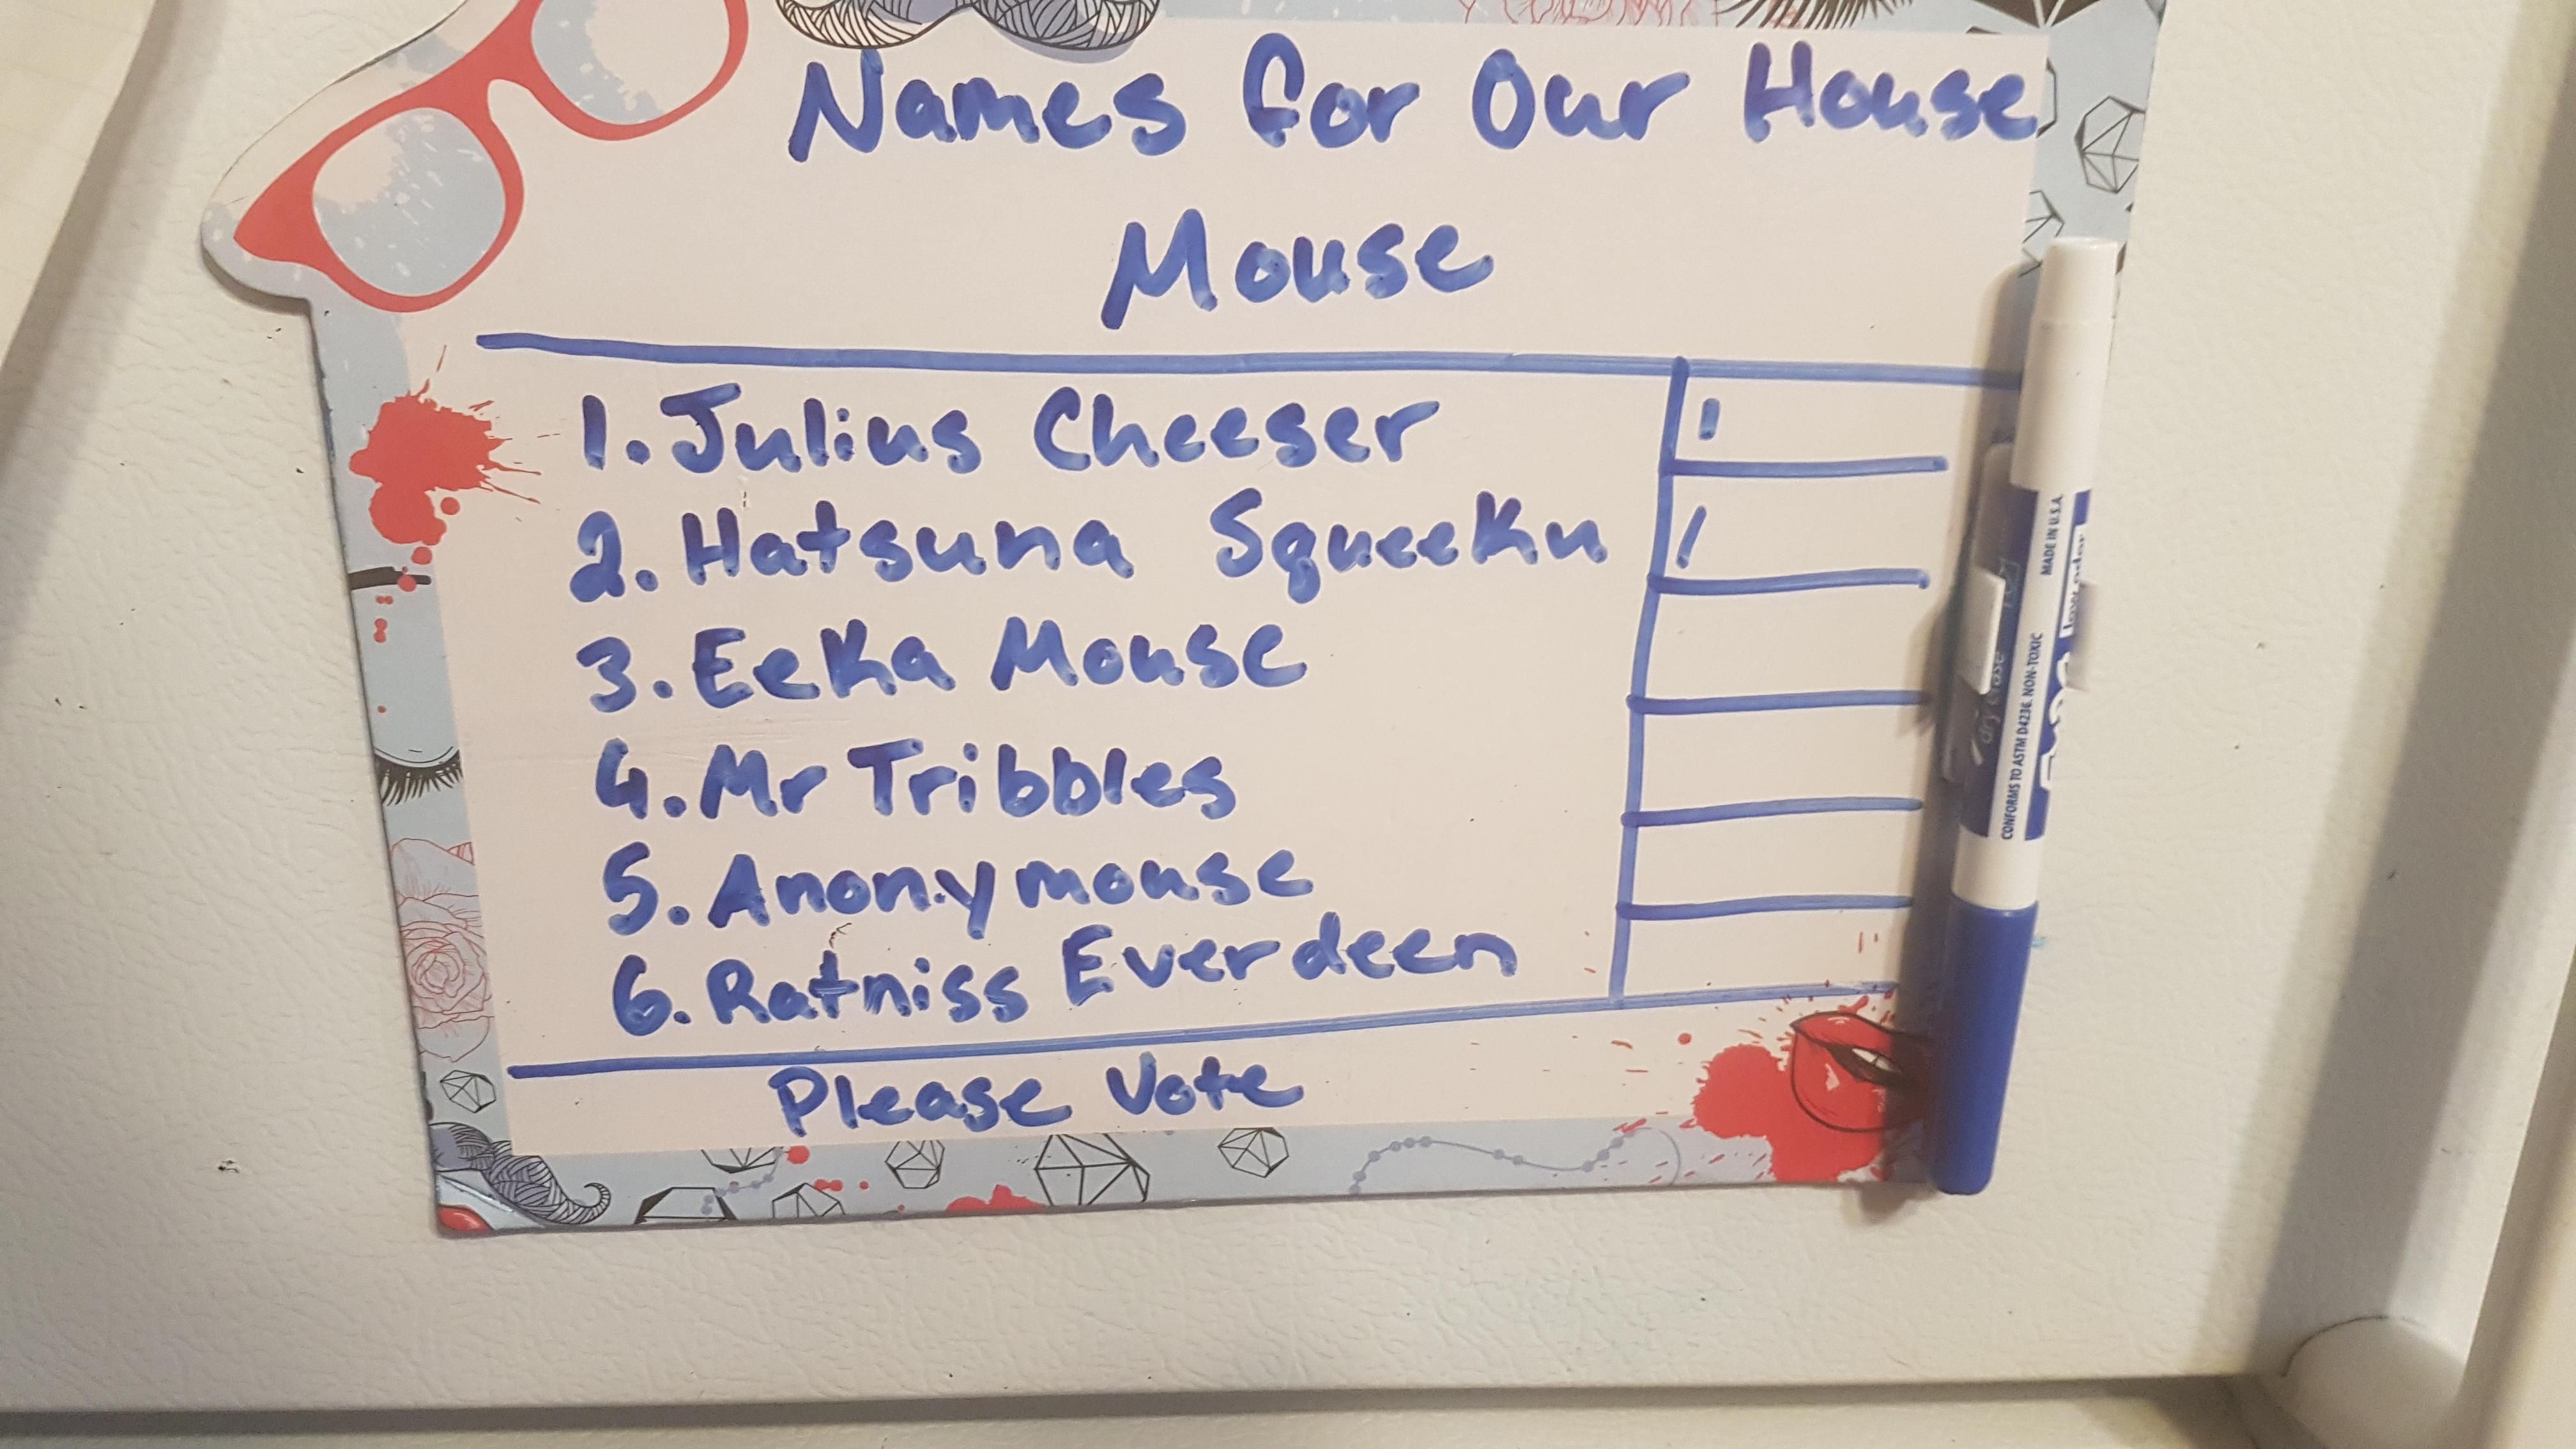 My girlfriend has a mouse in her house, so her cousin took it upon himself to do what was necessary